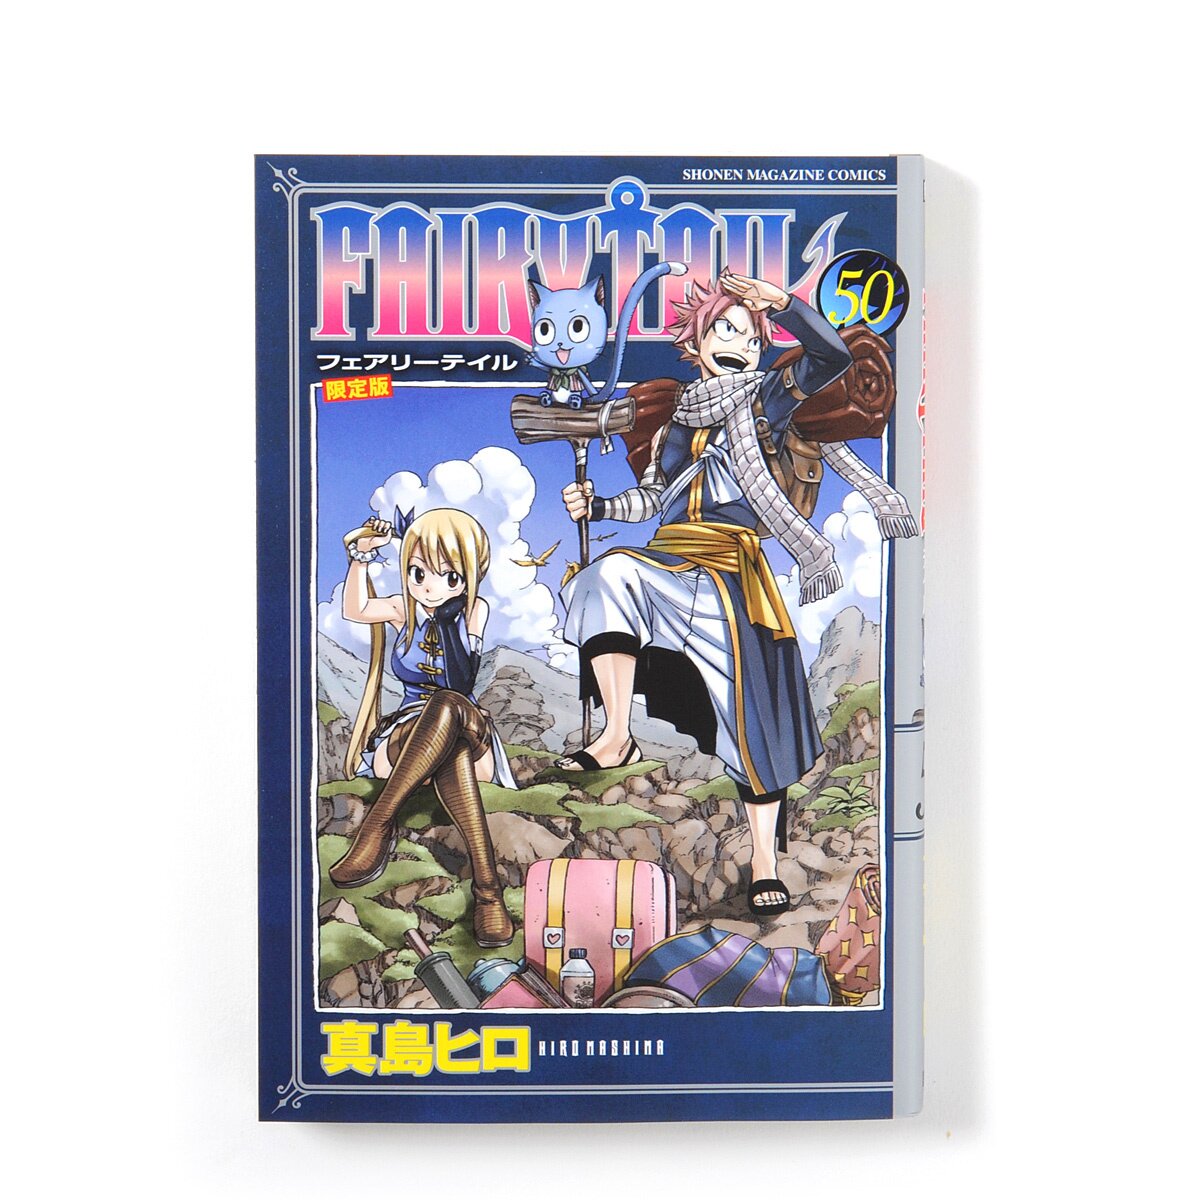 Fairy Tail Vol. 50 Limited Edition